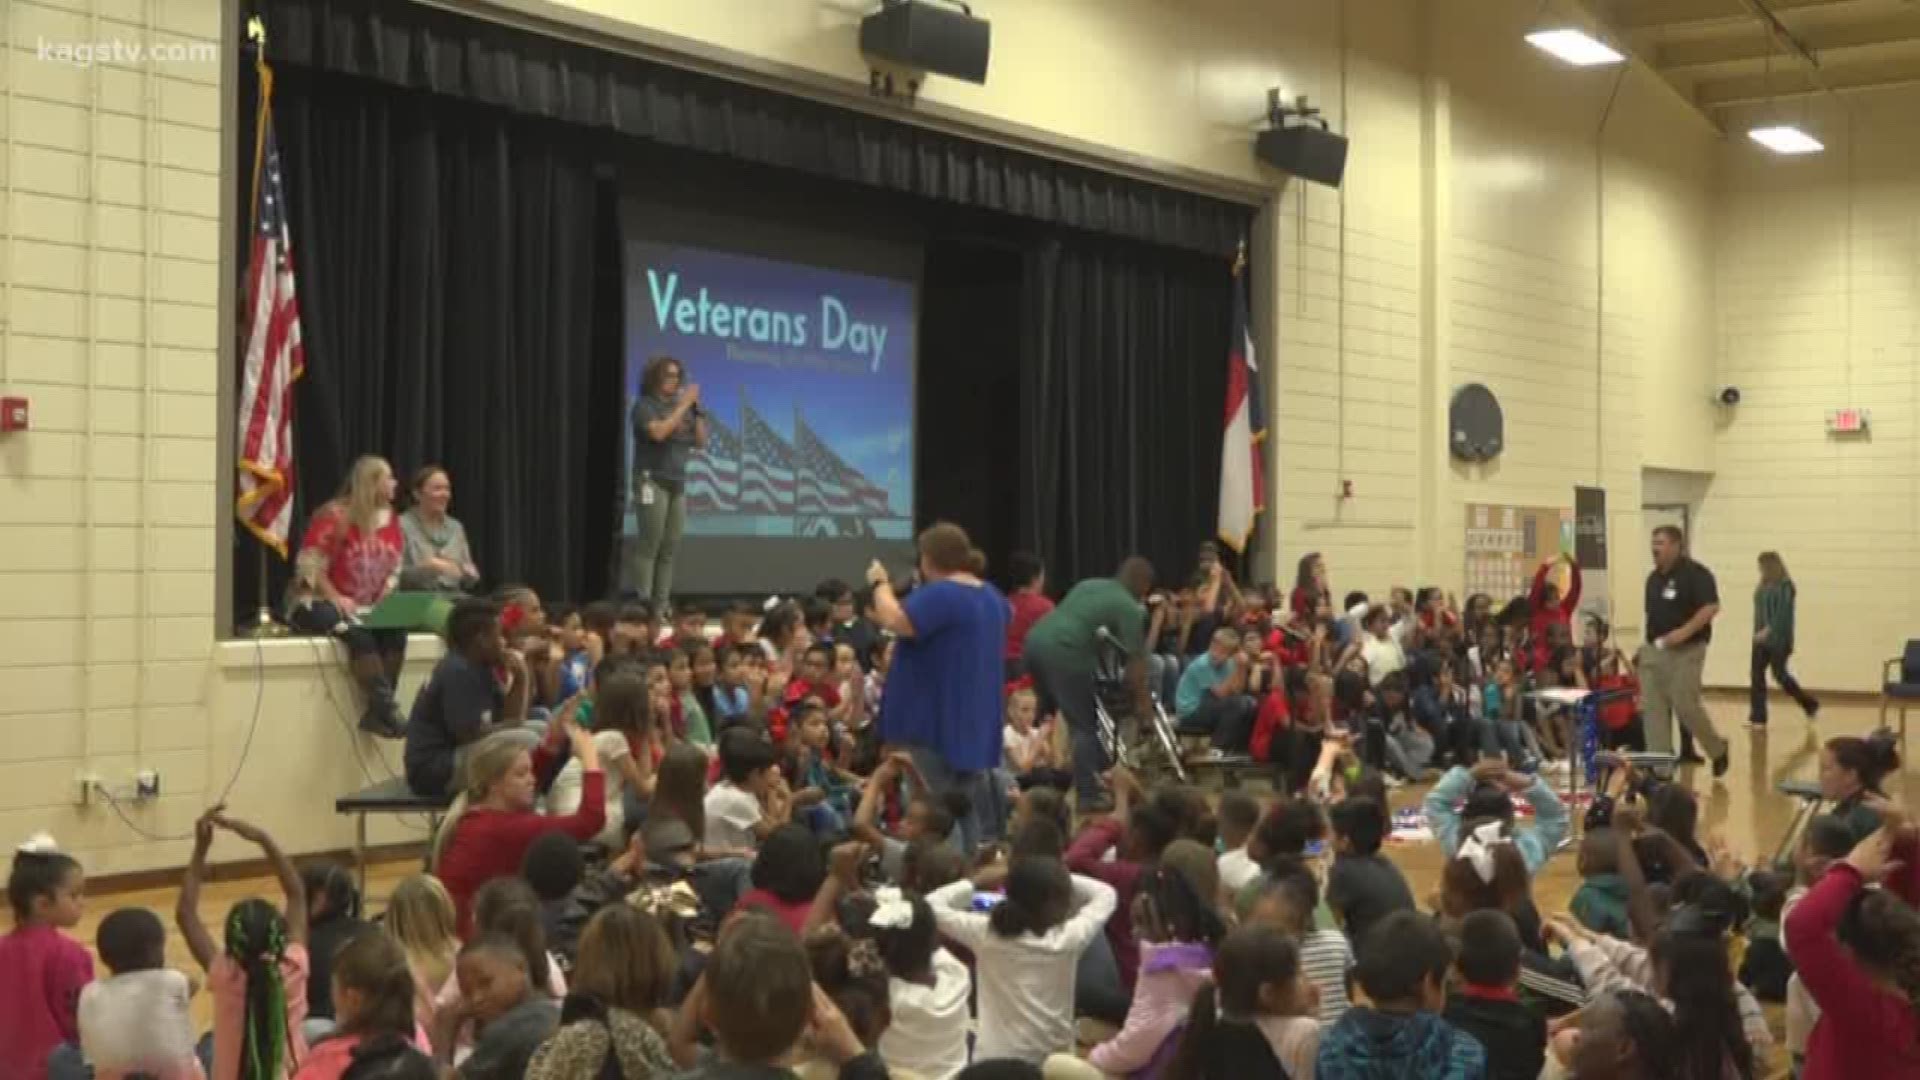 The virtual race and Take a Vet to School Day program were open to schools across the nation.